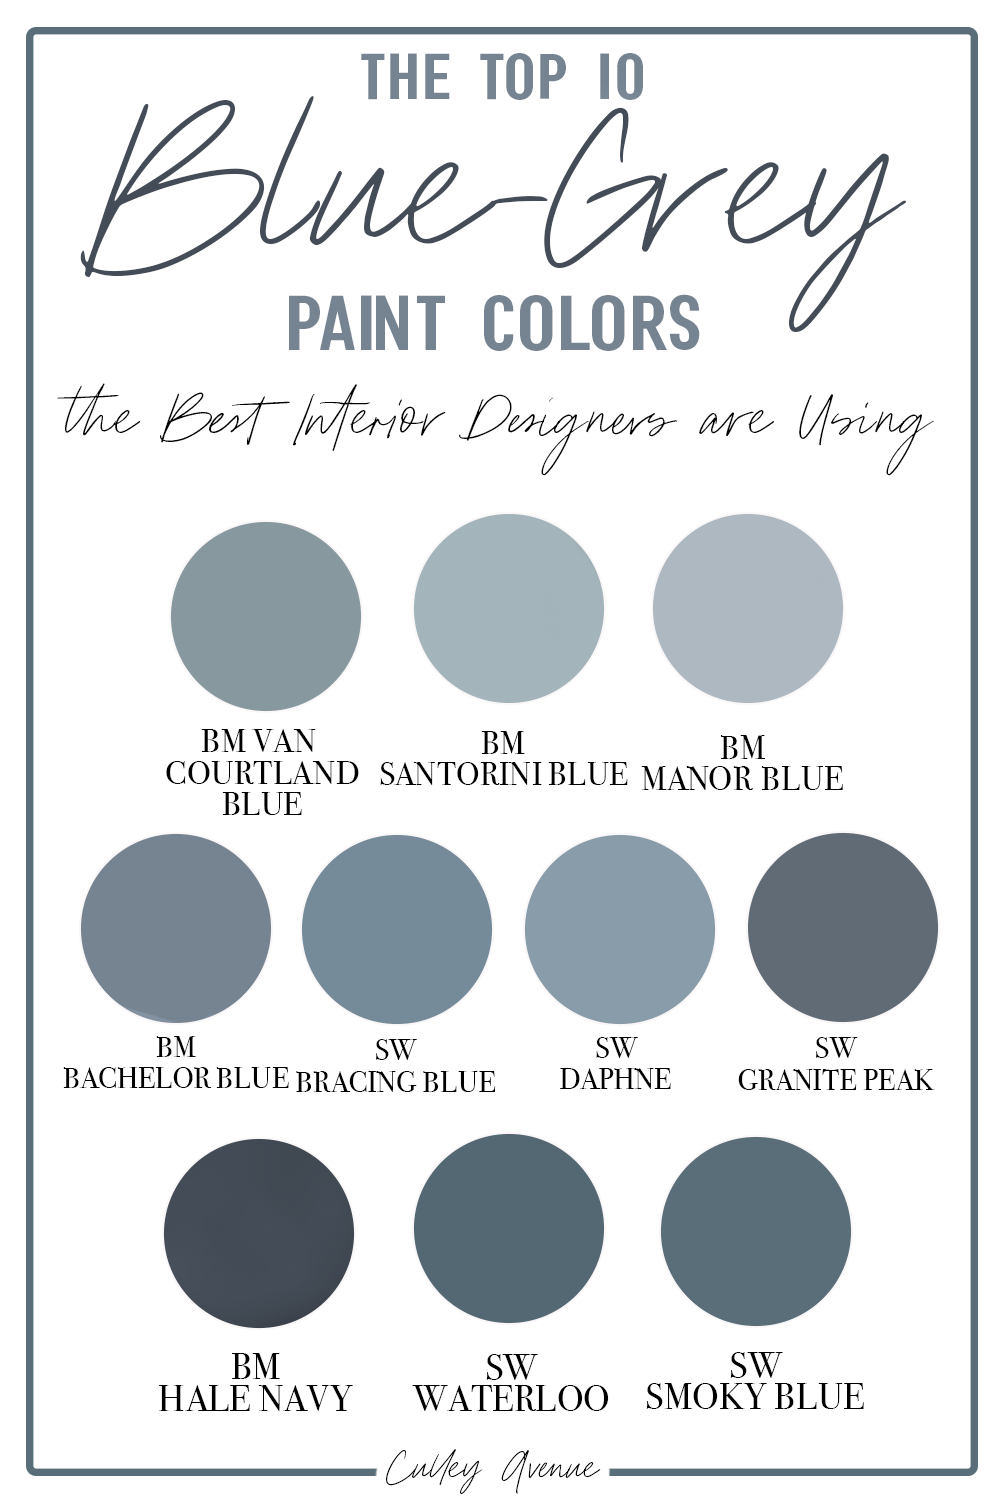 The Top 10 Blue Grey Paint Colors the Best Interior Designers are